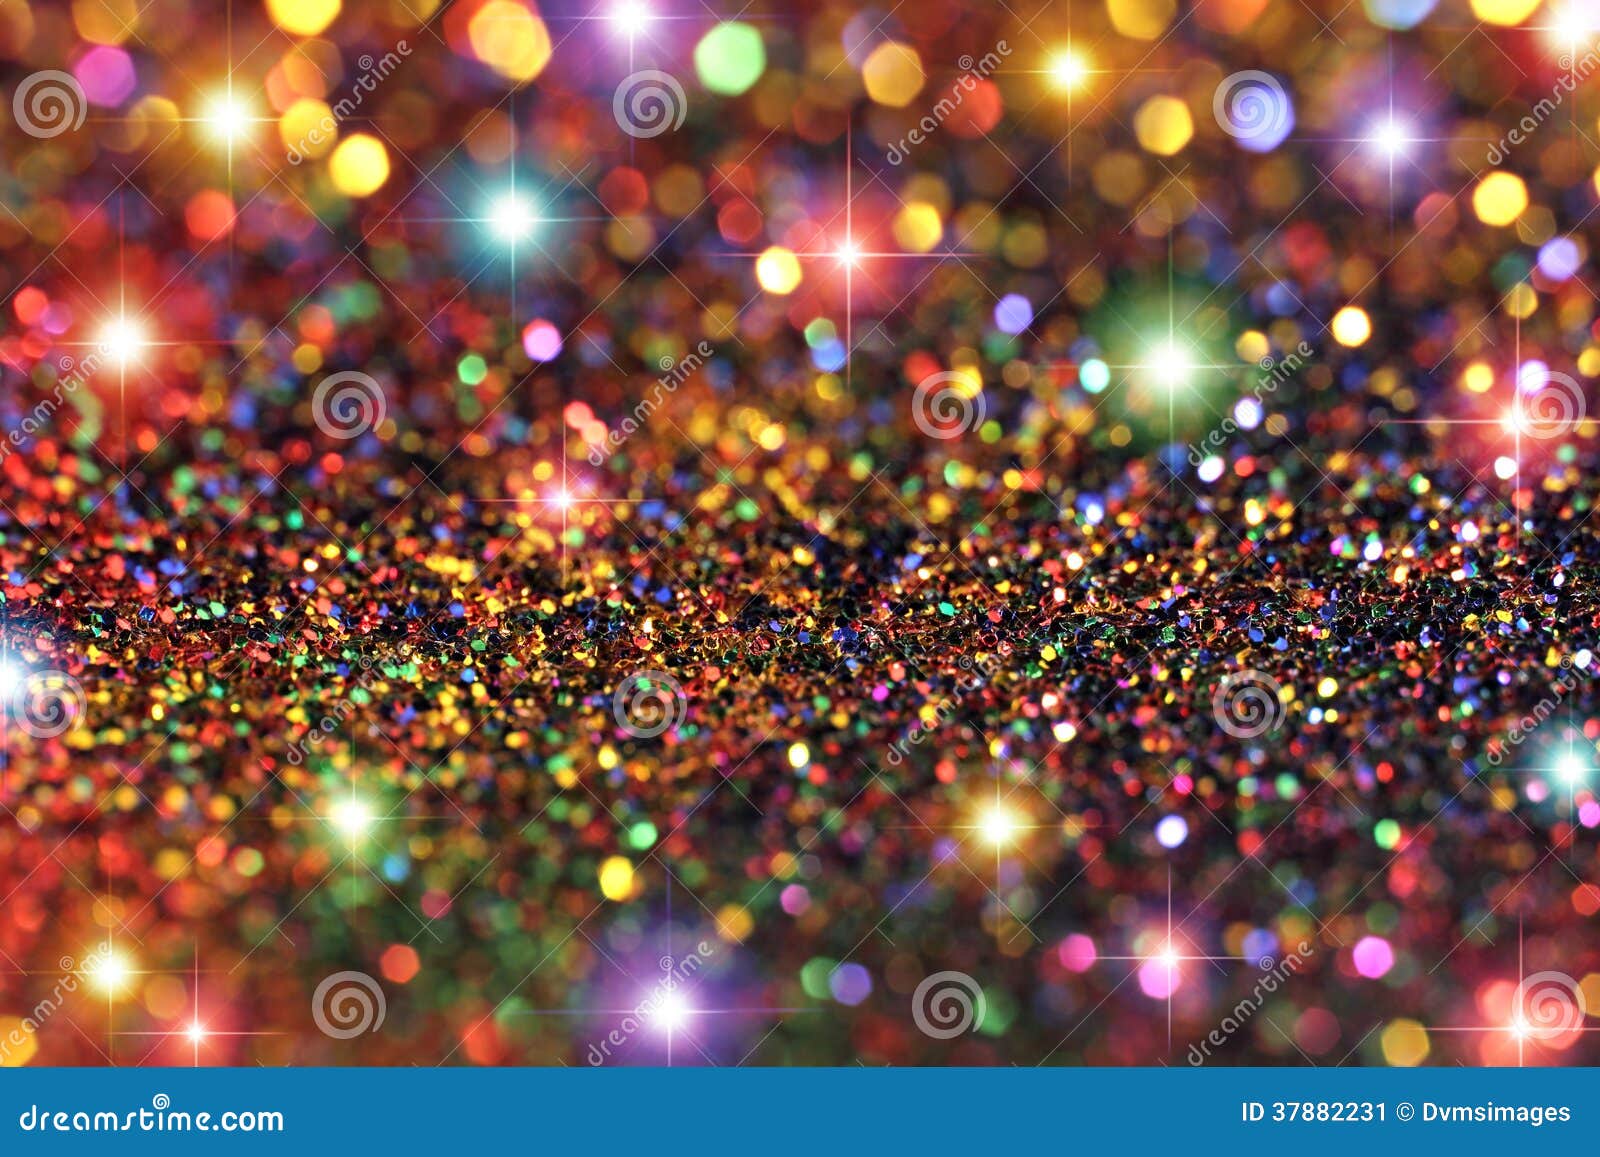 Glitter Sequins Star Mesh Multicolor Christmas Party Wedding Background Decor LH 